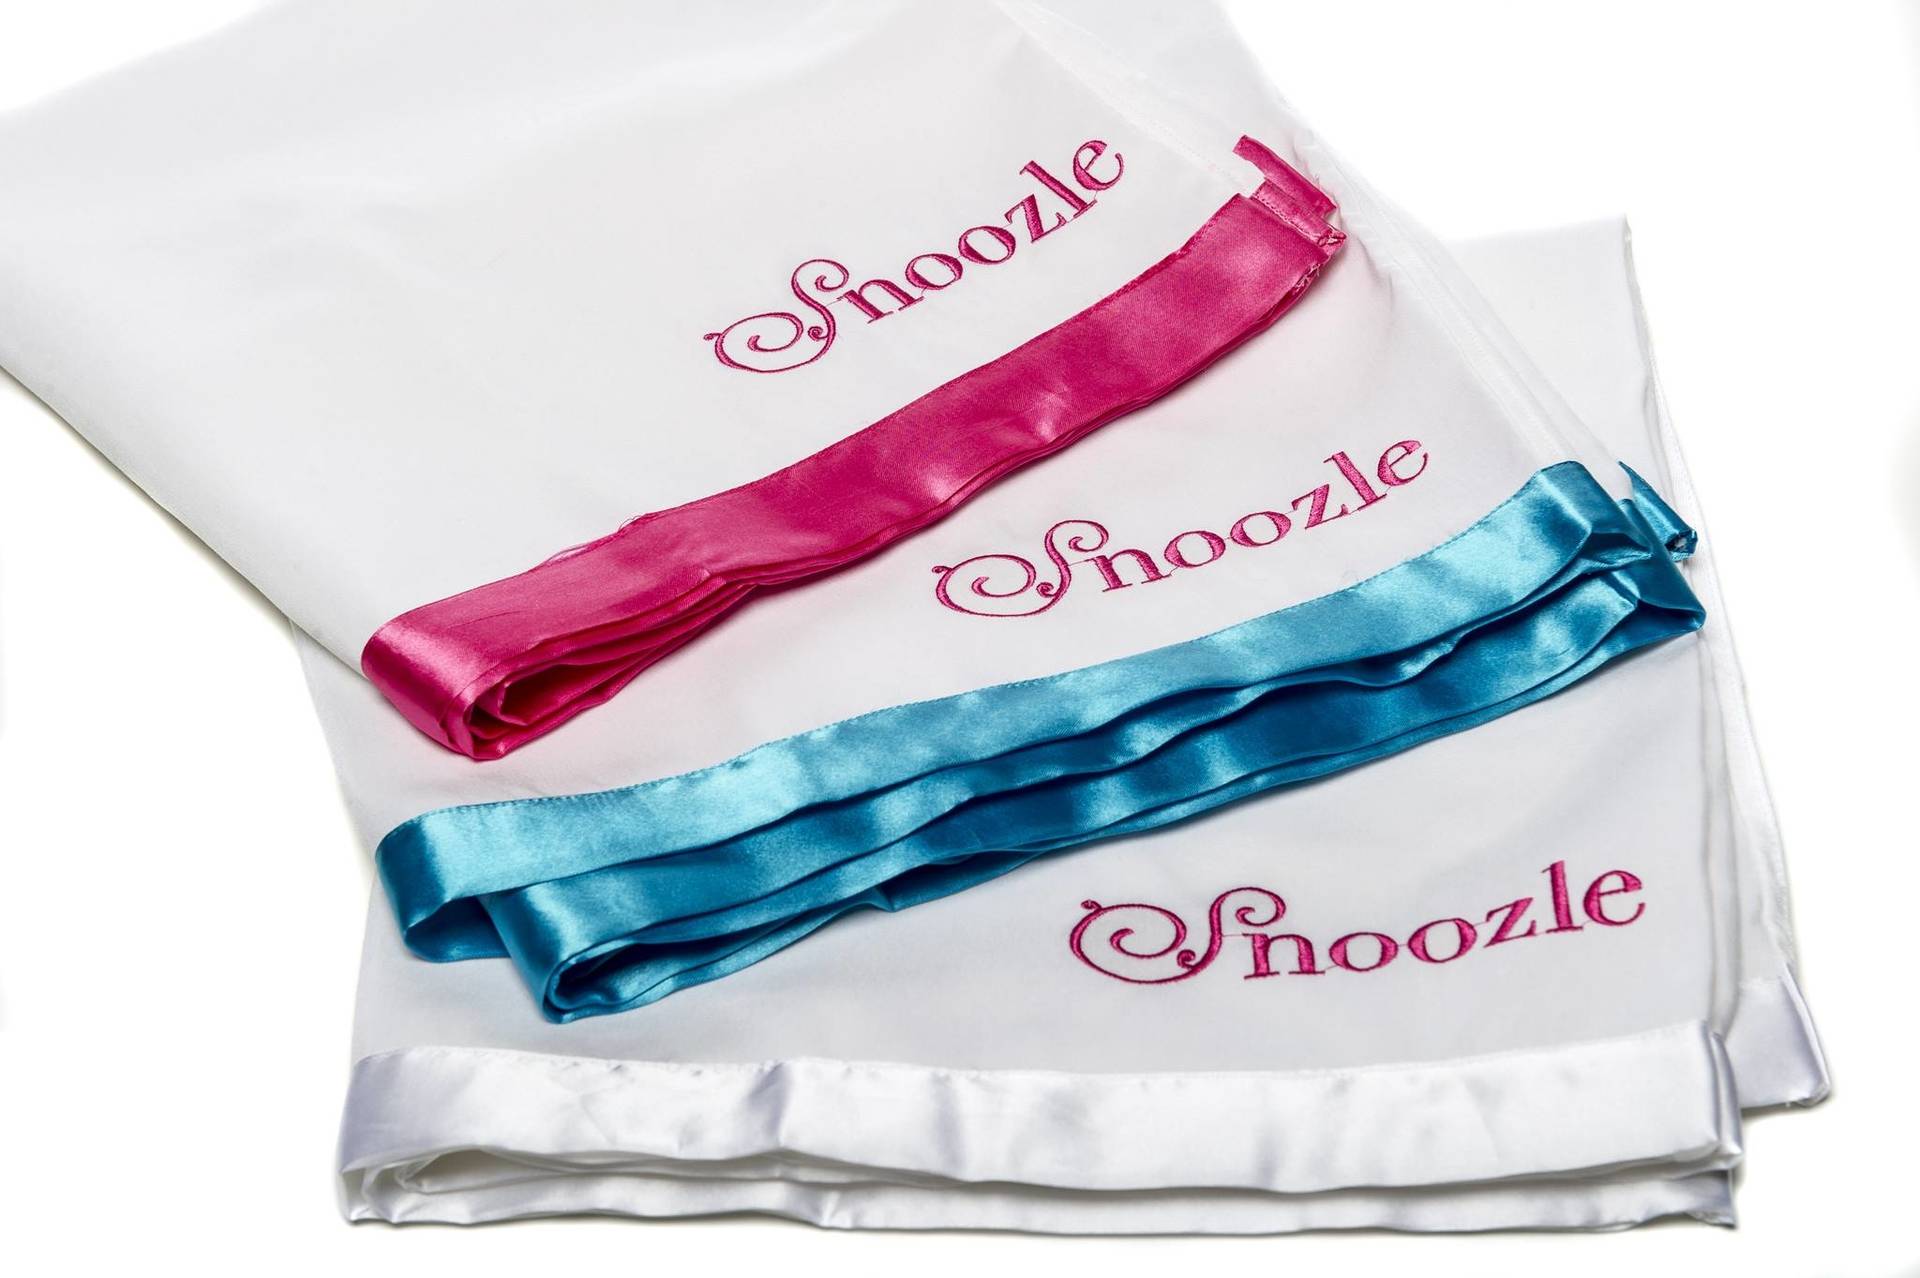 The Snoozle slide sheet